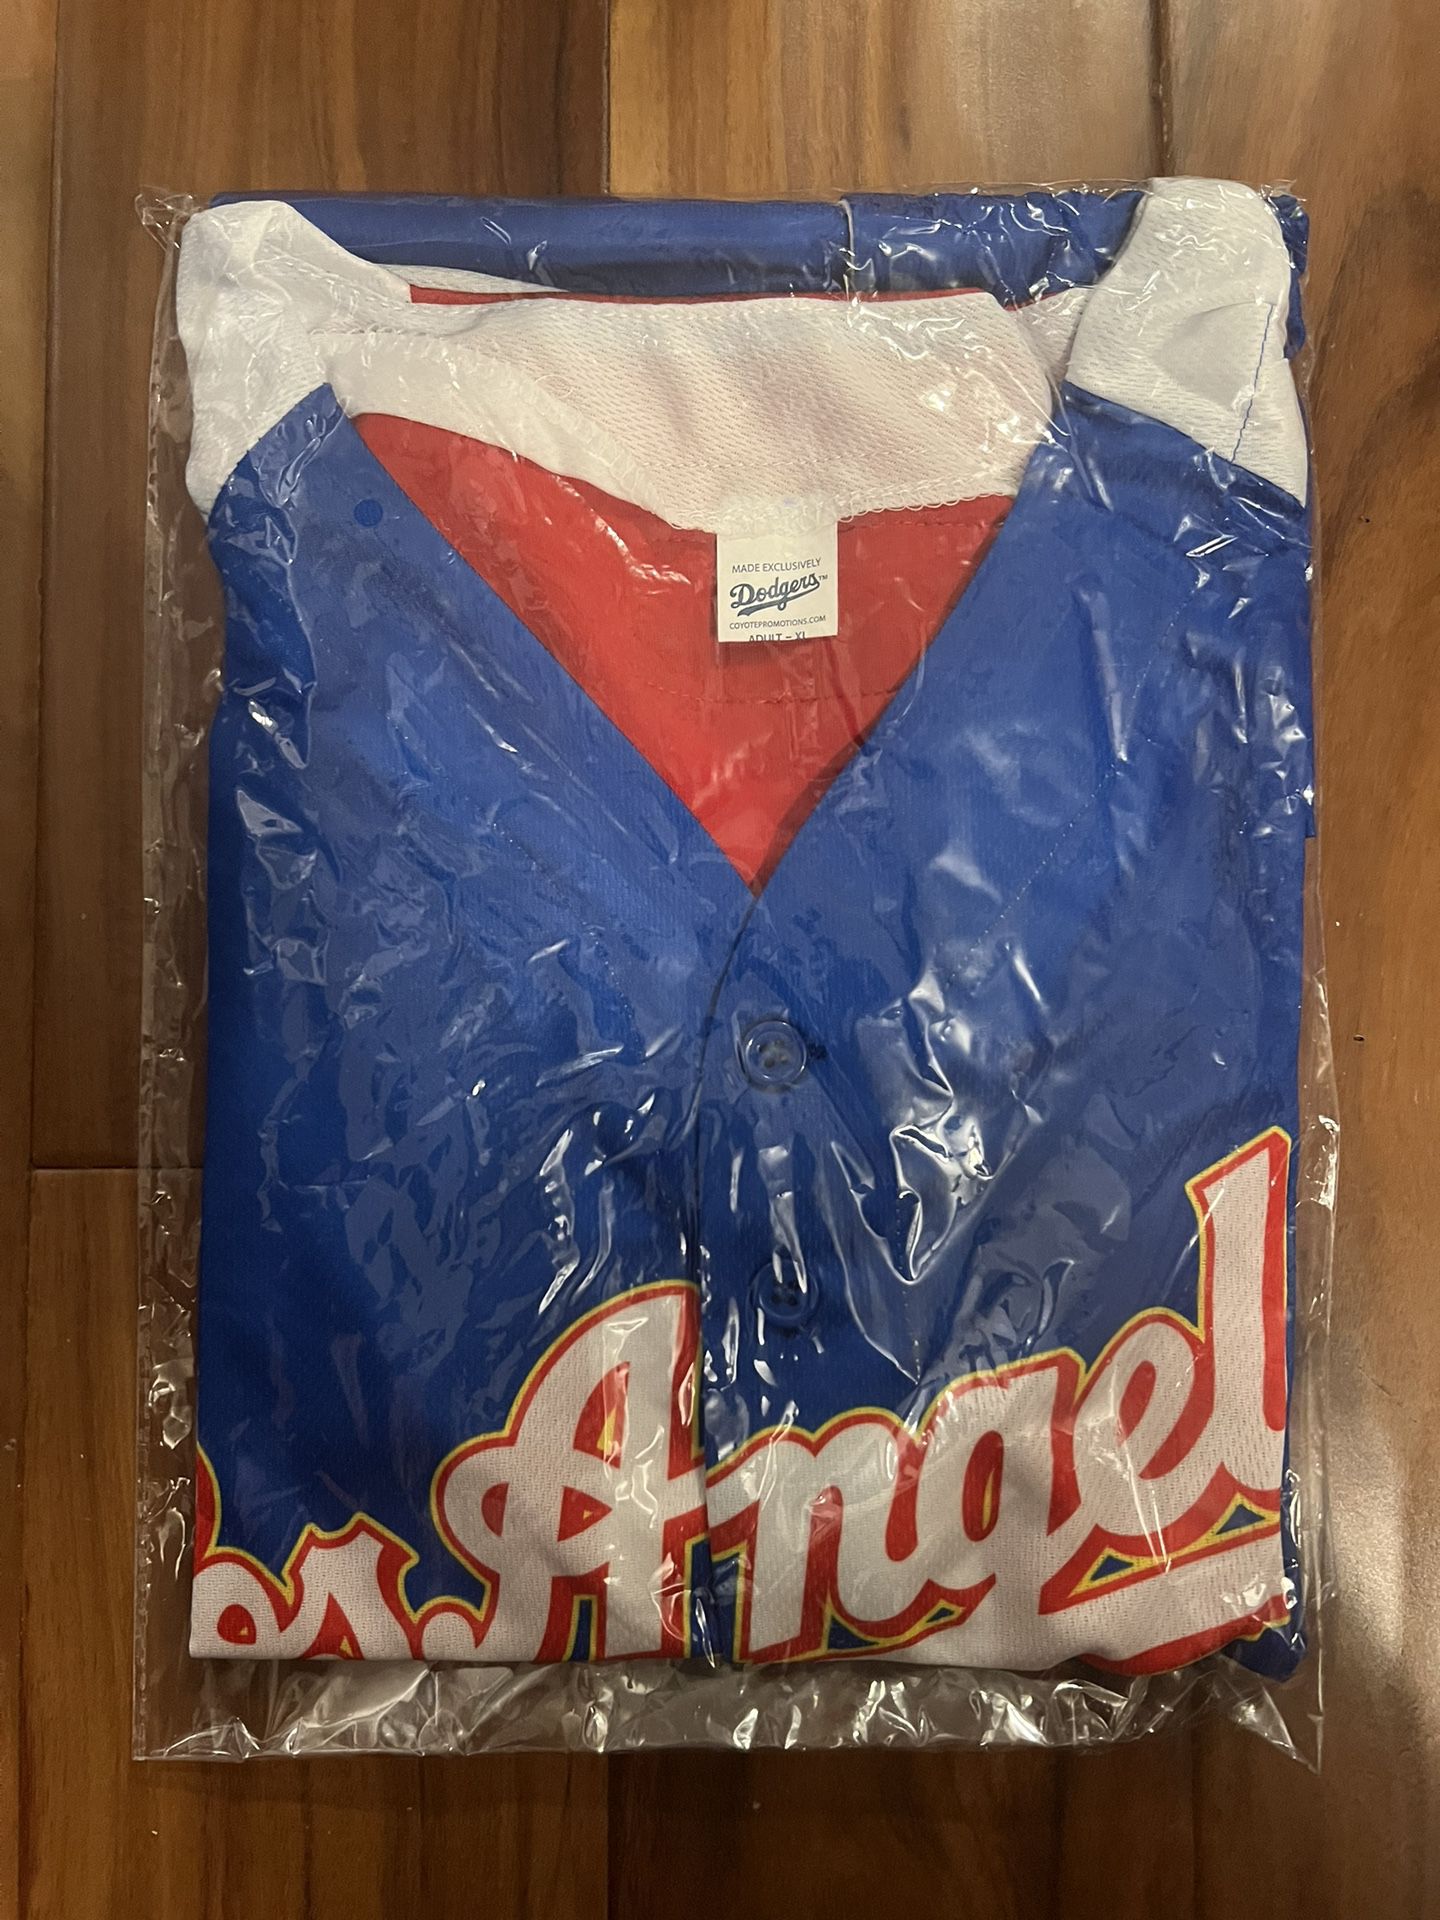 2022 Los Angeles Dodgers Filipino Heritage Night Jersey SGA 7/7/22 Sz XL  for Sale in Fountain Valley, CA - OfferUp